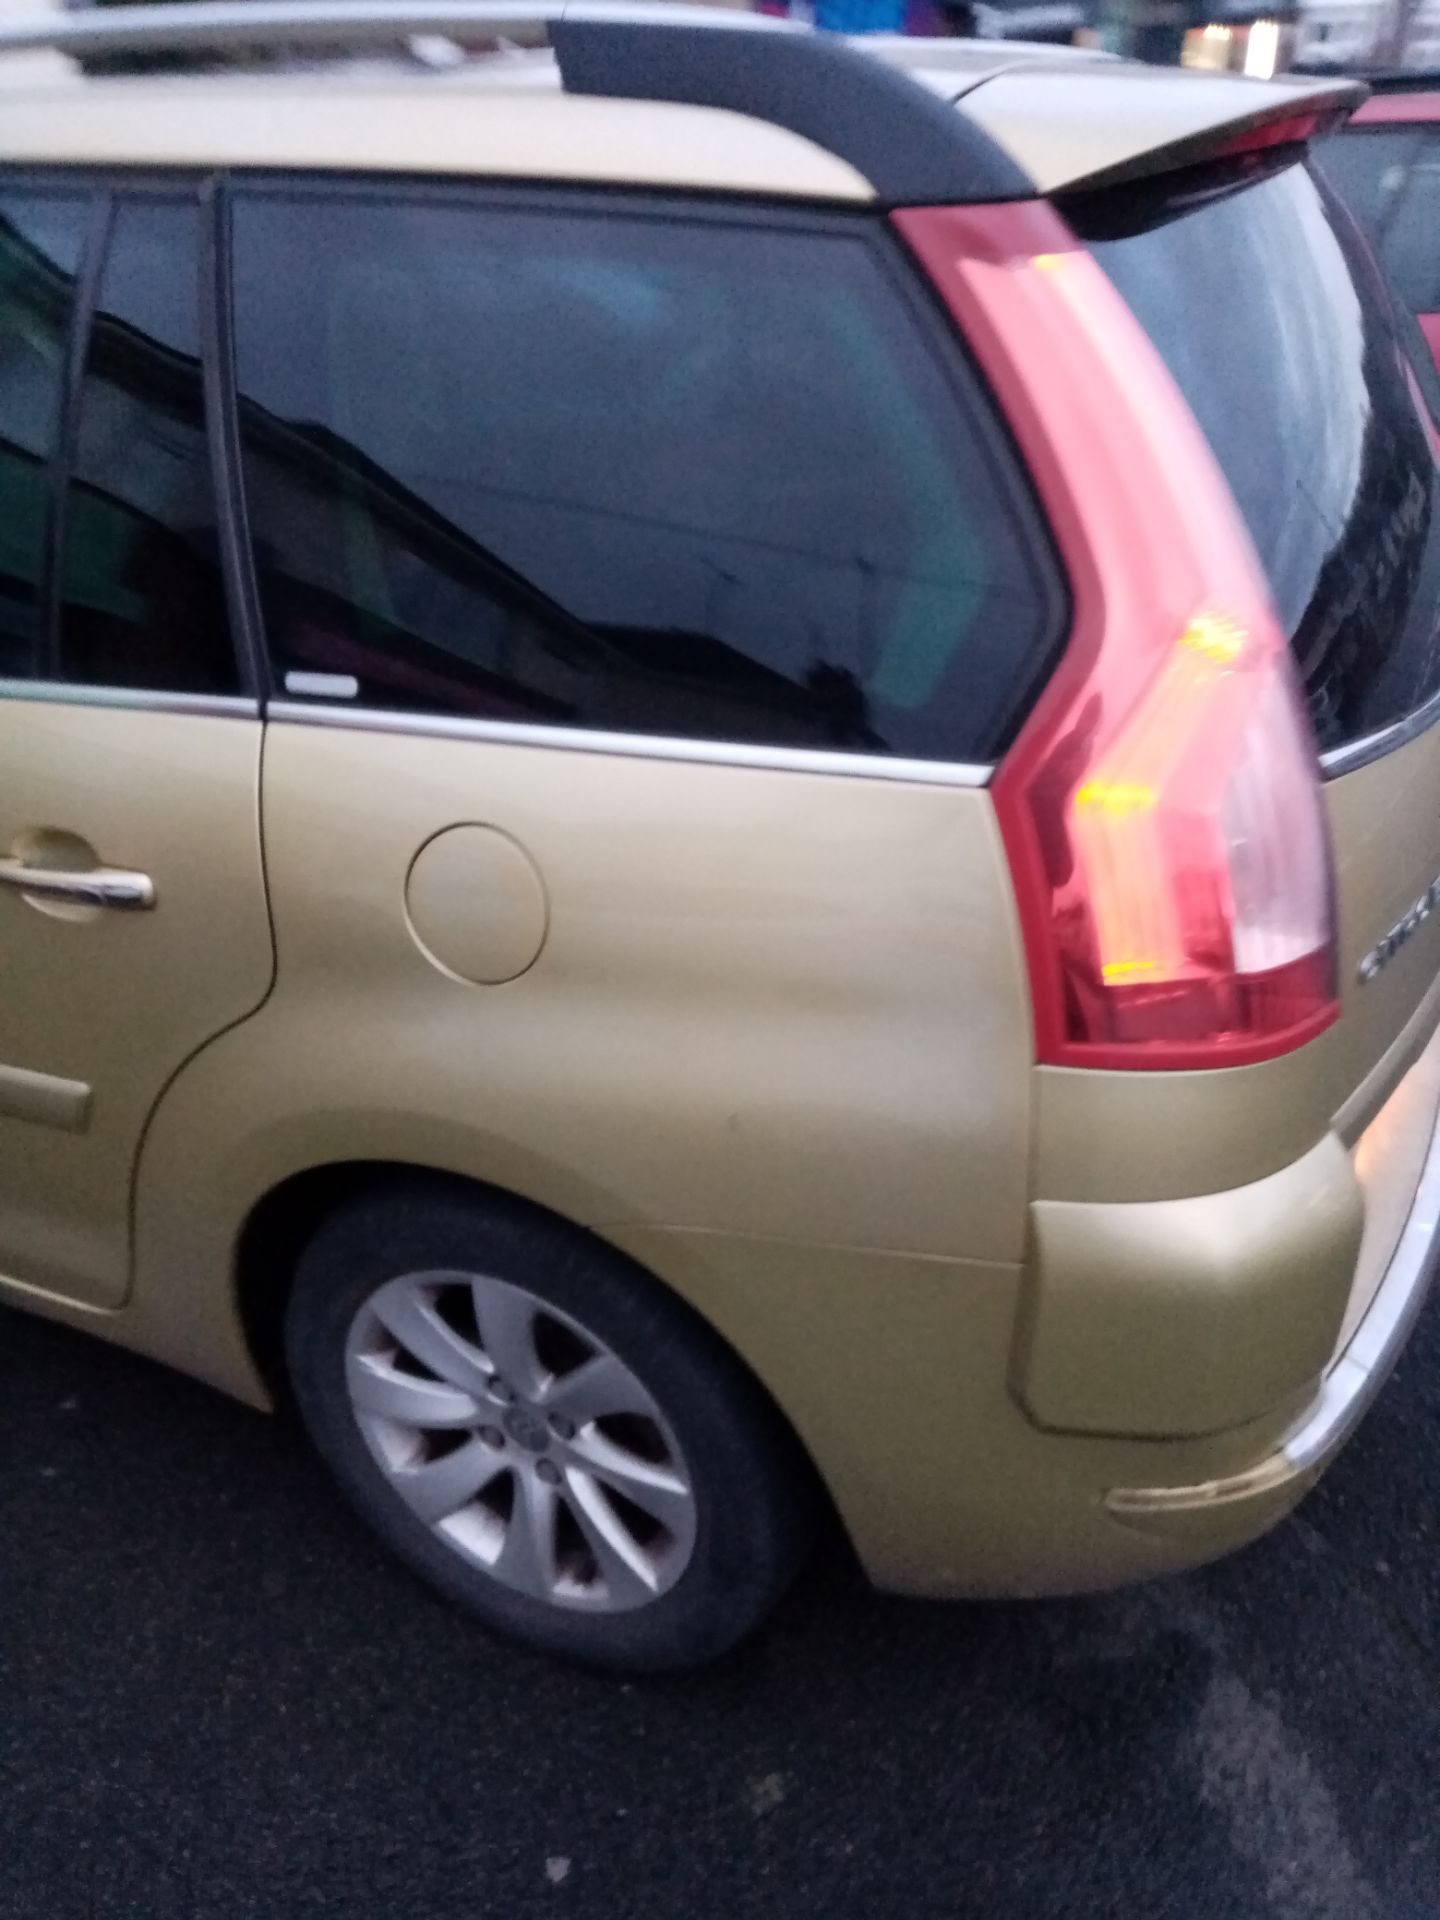 2007 CITROEN C4 GRAND PICASSO 7 SEAT EXCL HDI A - Image 5 of 15